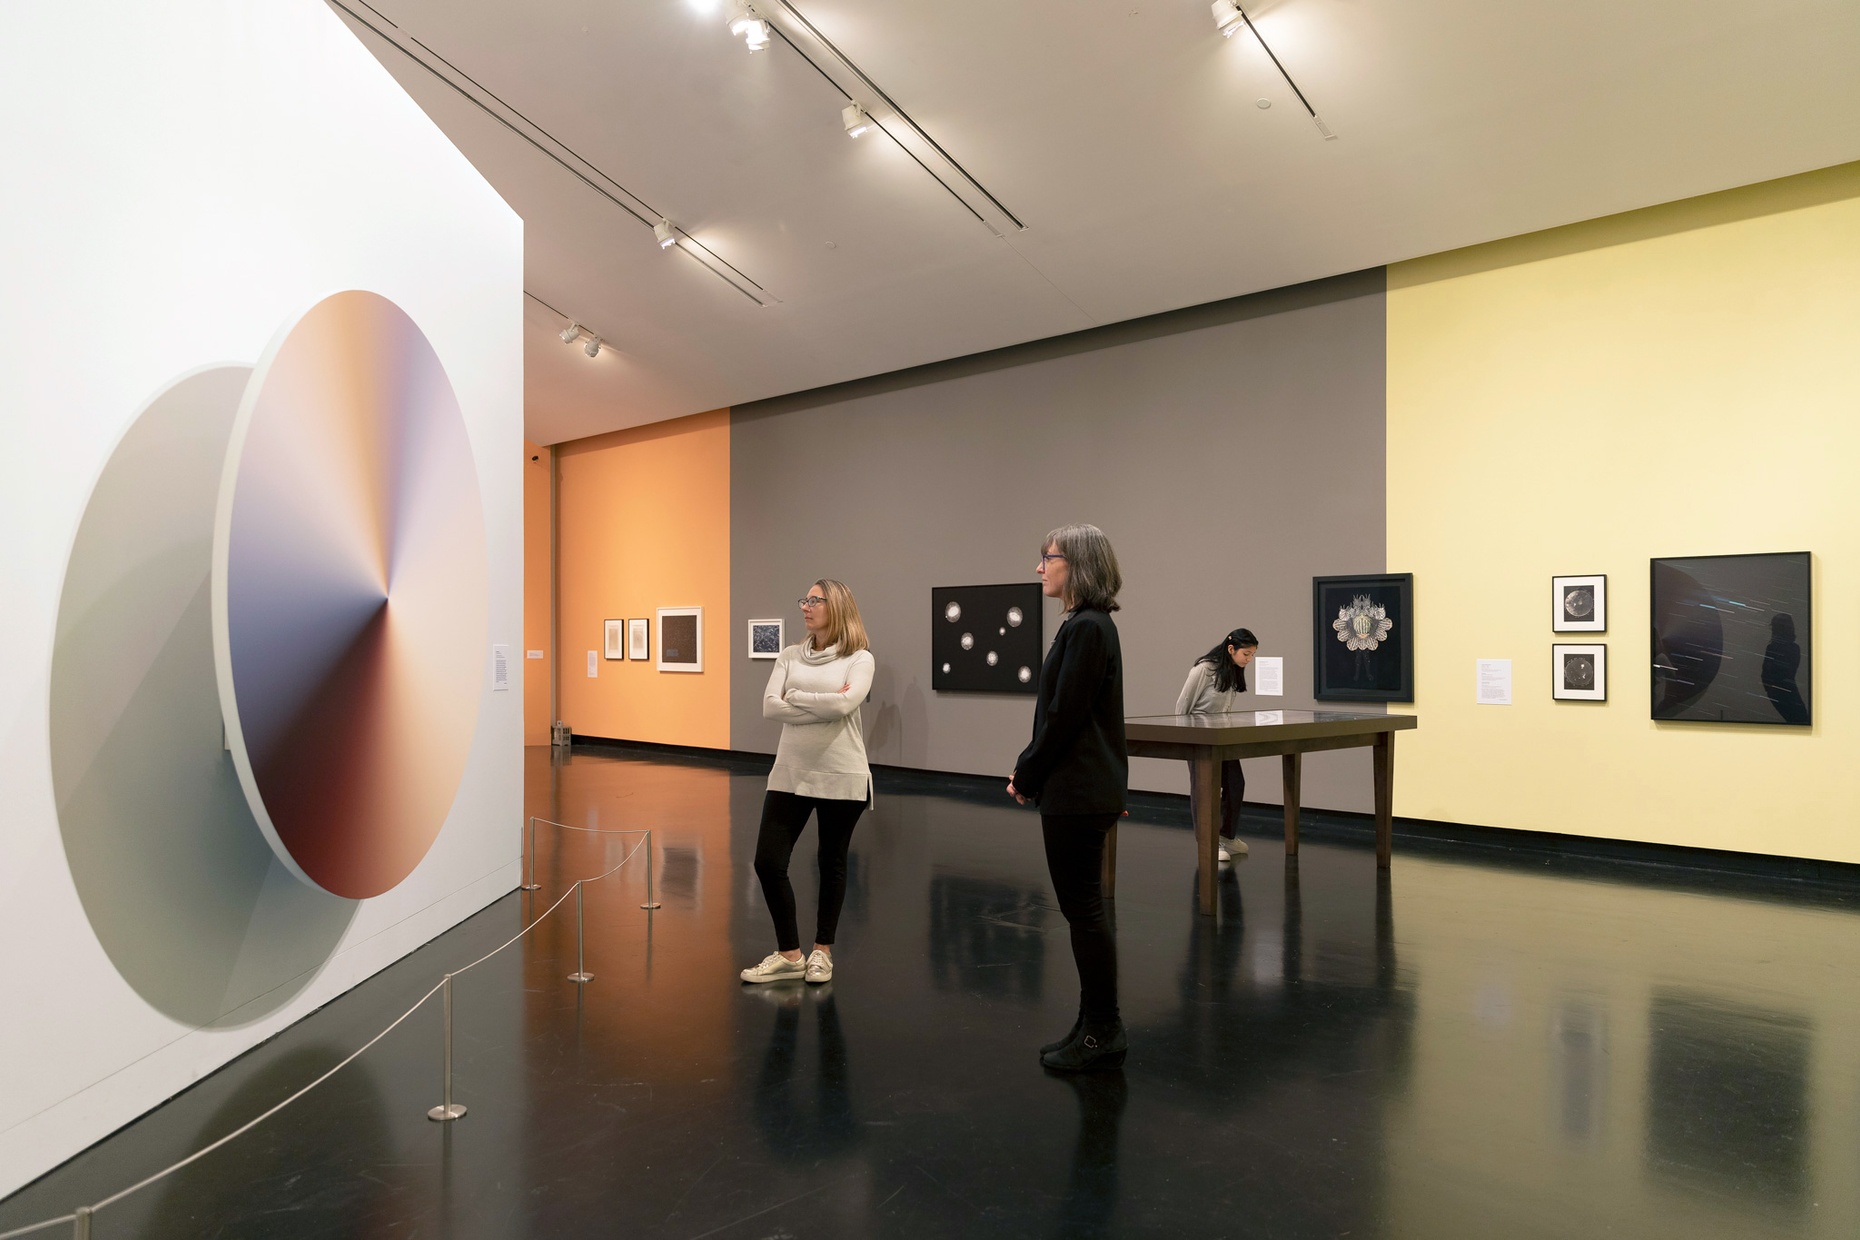 Two women stand and look to our left at a circular artwork on a white wall, diagonally in front of an orange, gray, and yellow wall with framed artworks.